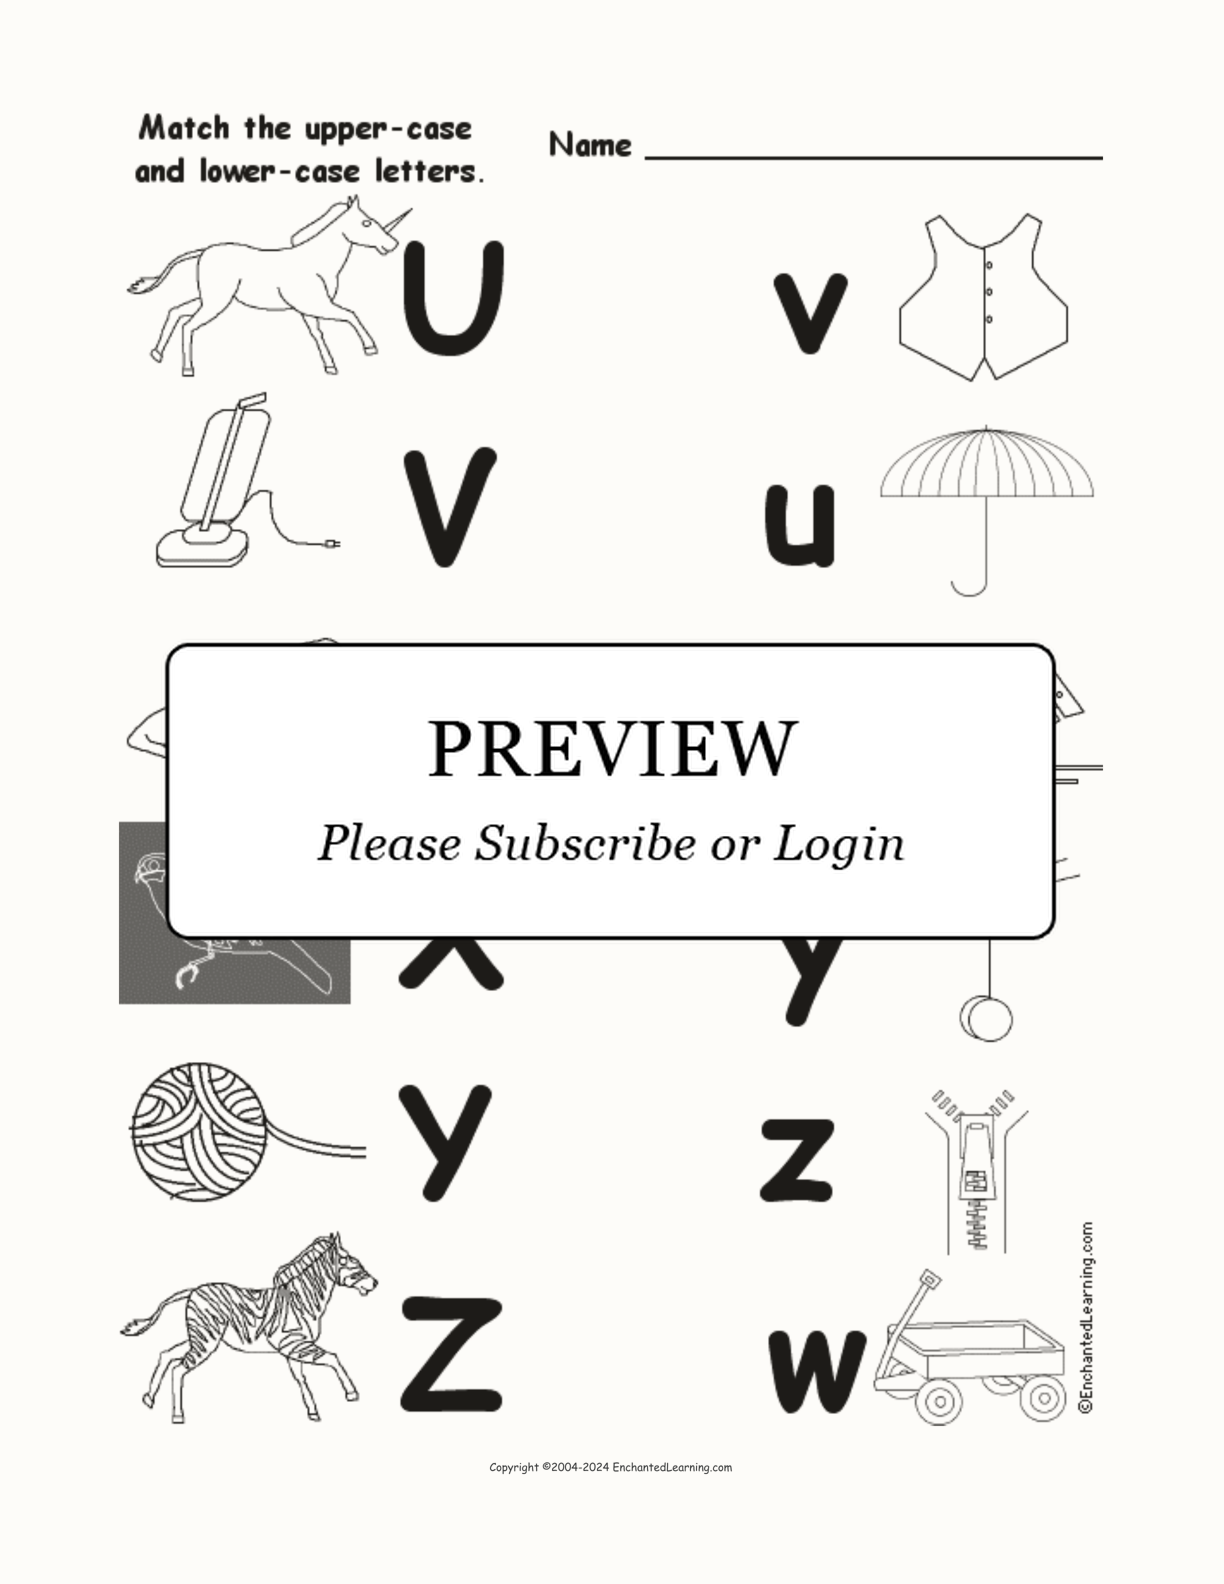 Match Uppercase and Lowercase Letters U-Z interactive worksheet page 1